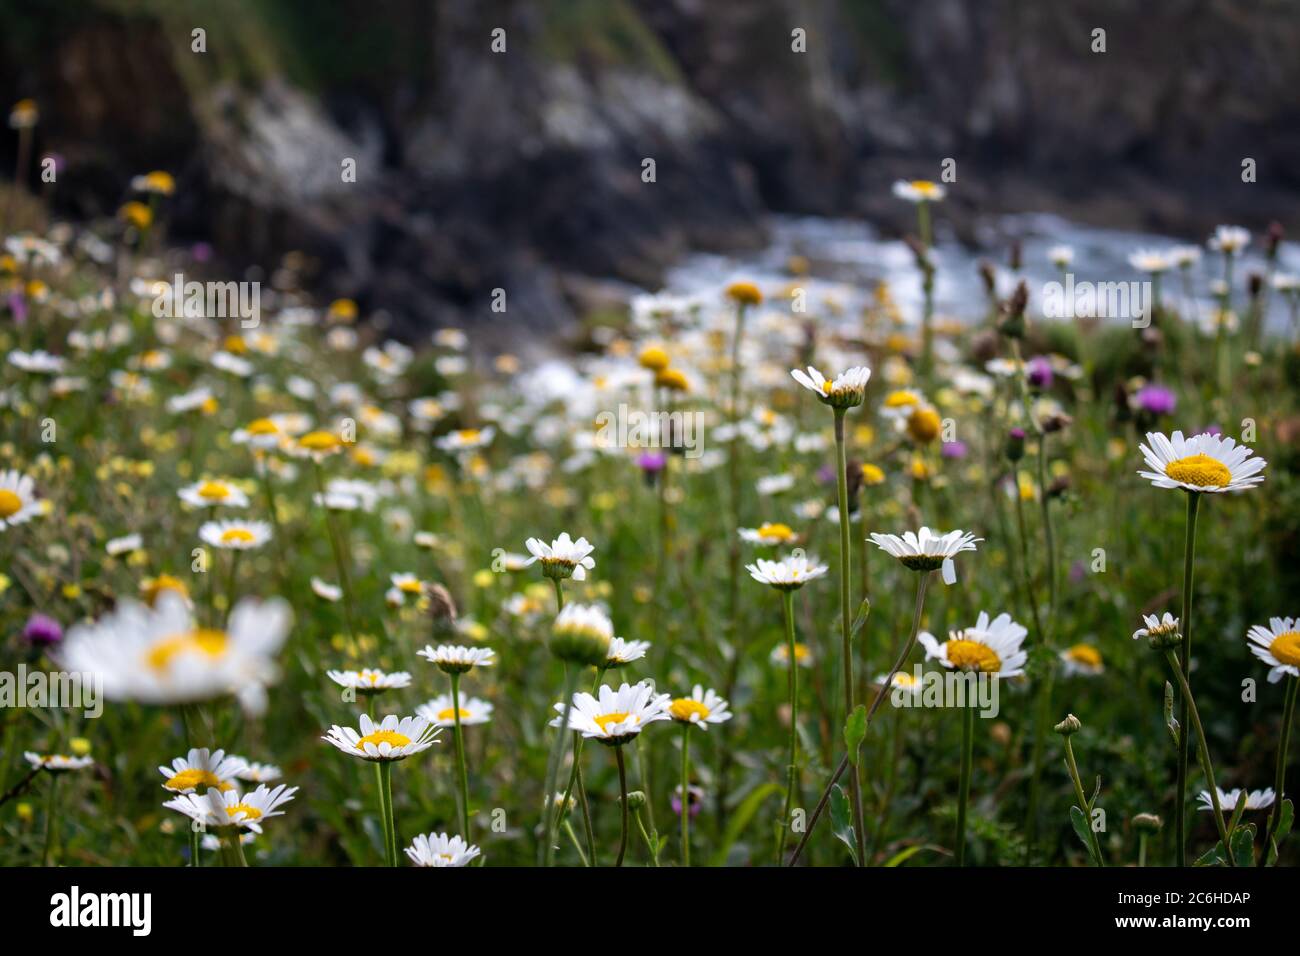 Flowers of daisies in the countryside at sunset Stock Photo